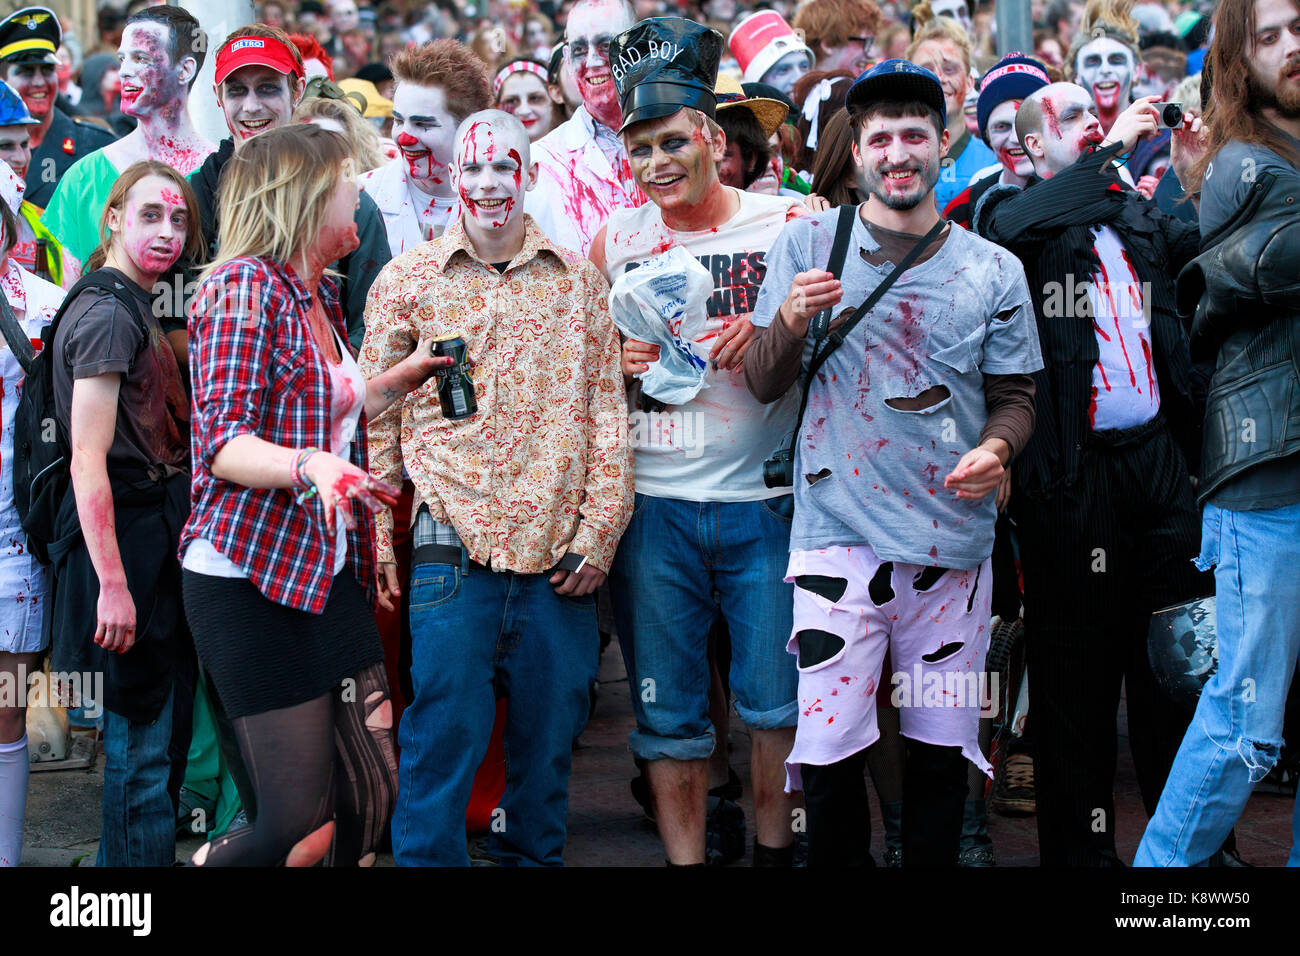 A group of smiling, happy people dressed up as Zombies for the annual Bristol Zombie Walk held every October close to Halloween Stock Photo